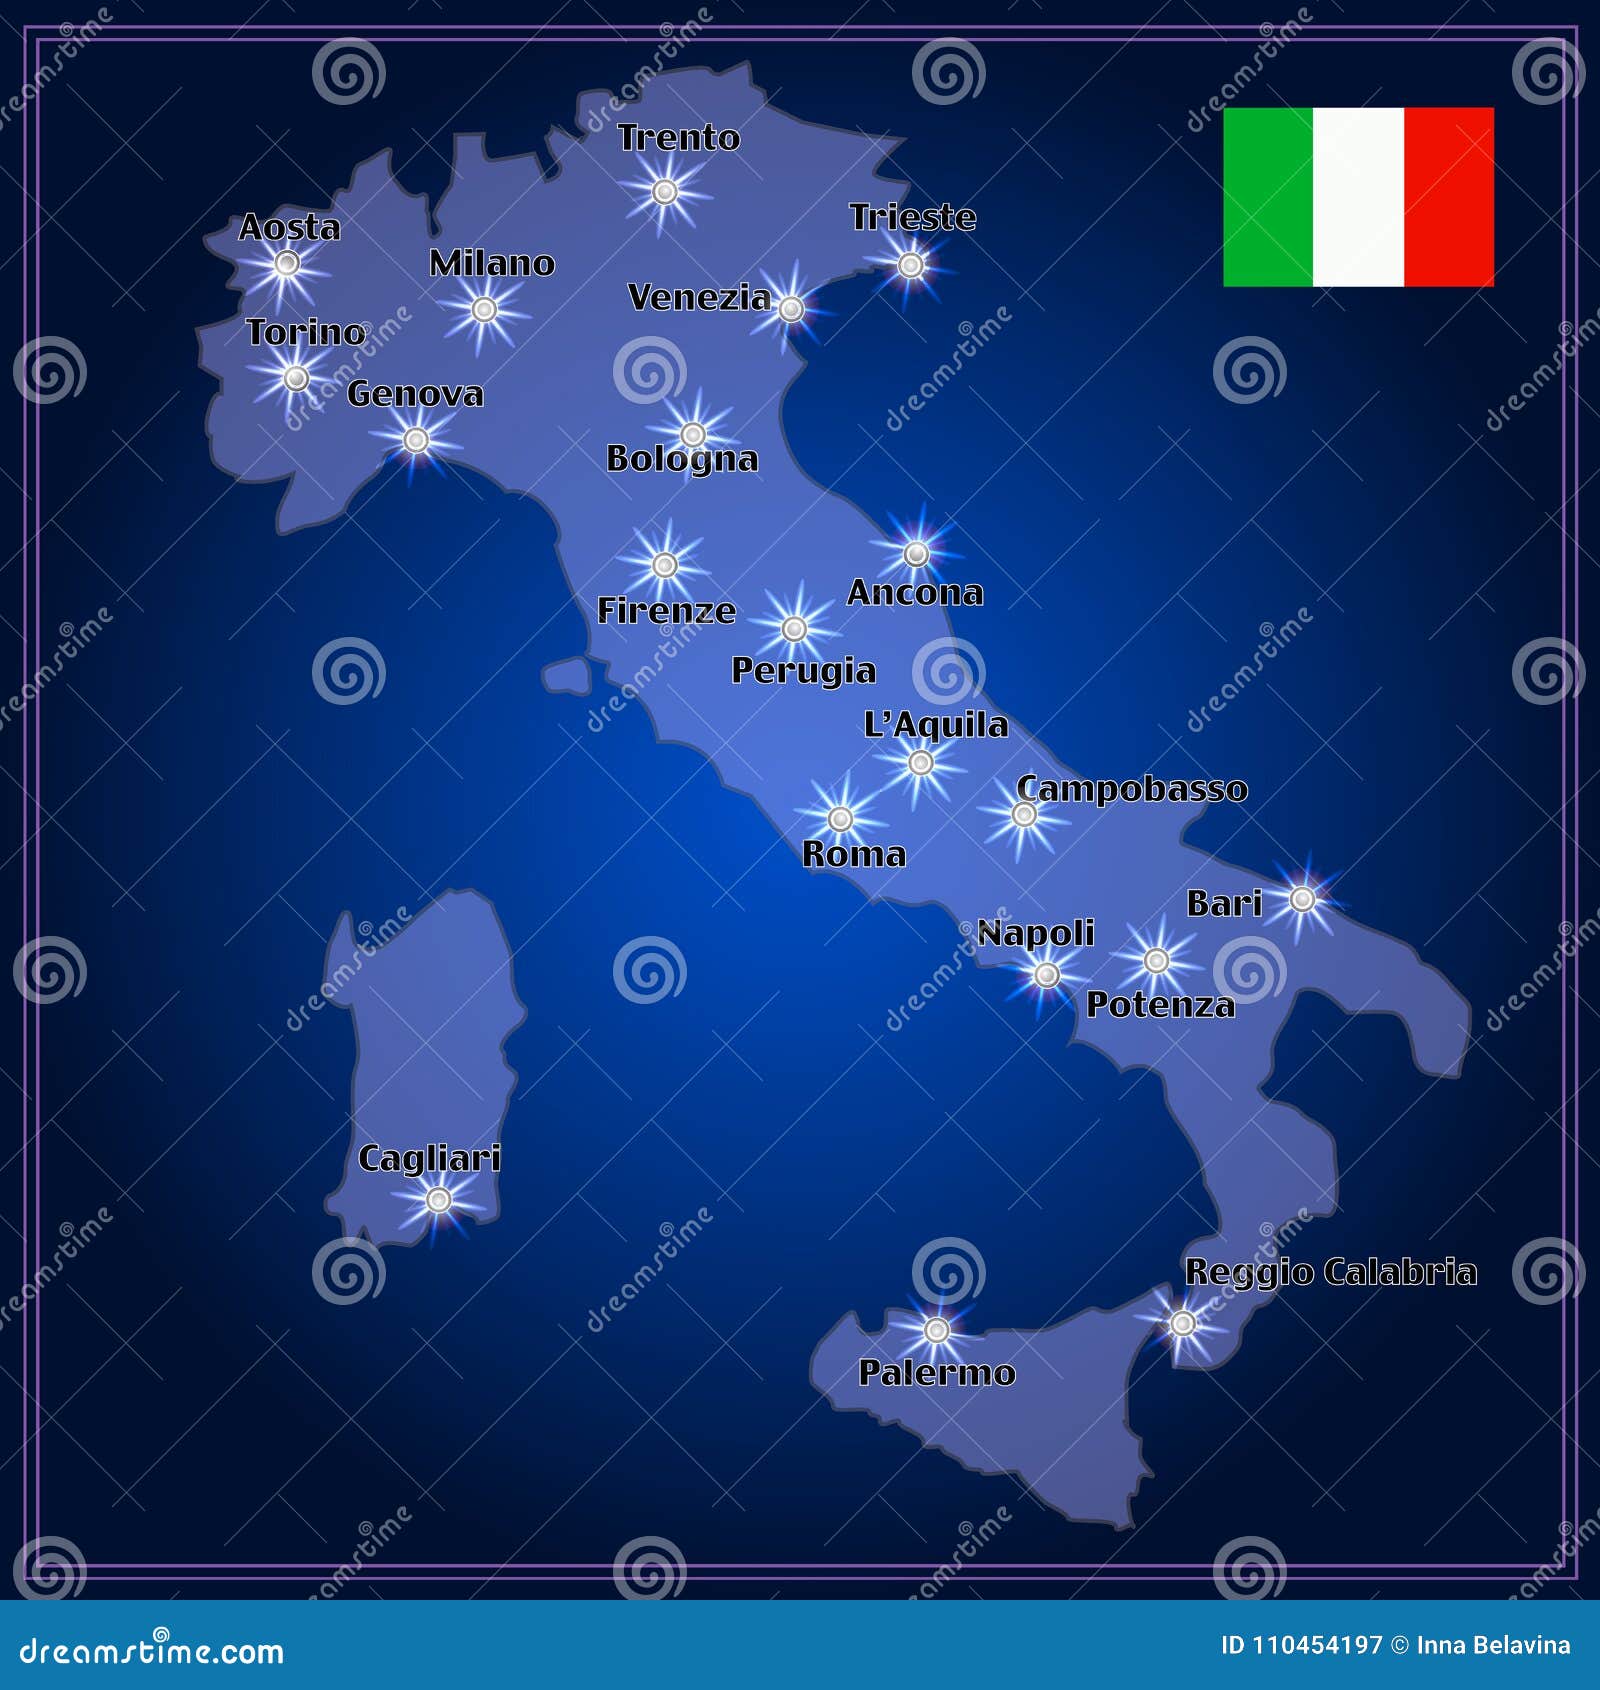 Map of Italy highlighting major tourist cities like Rome, Florence, Venice, and Naples